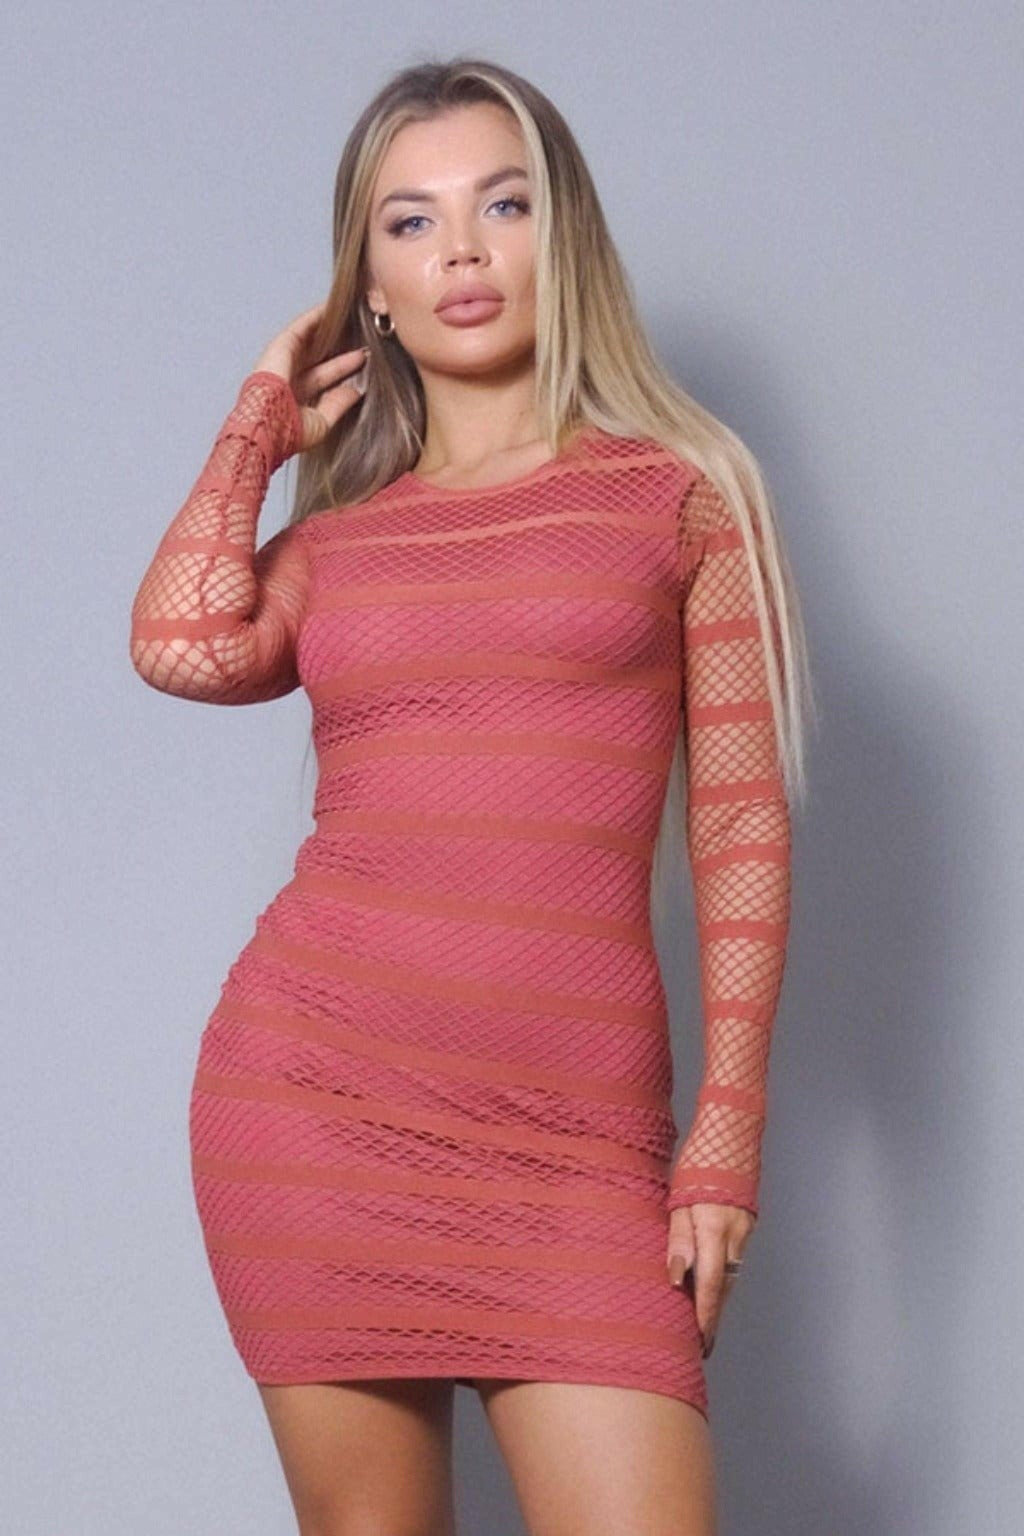 Epicplacess DRESS Small / Red / UNITED STATES SEE THROUGH ME SEXY MESH MINI DRESS D7981